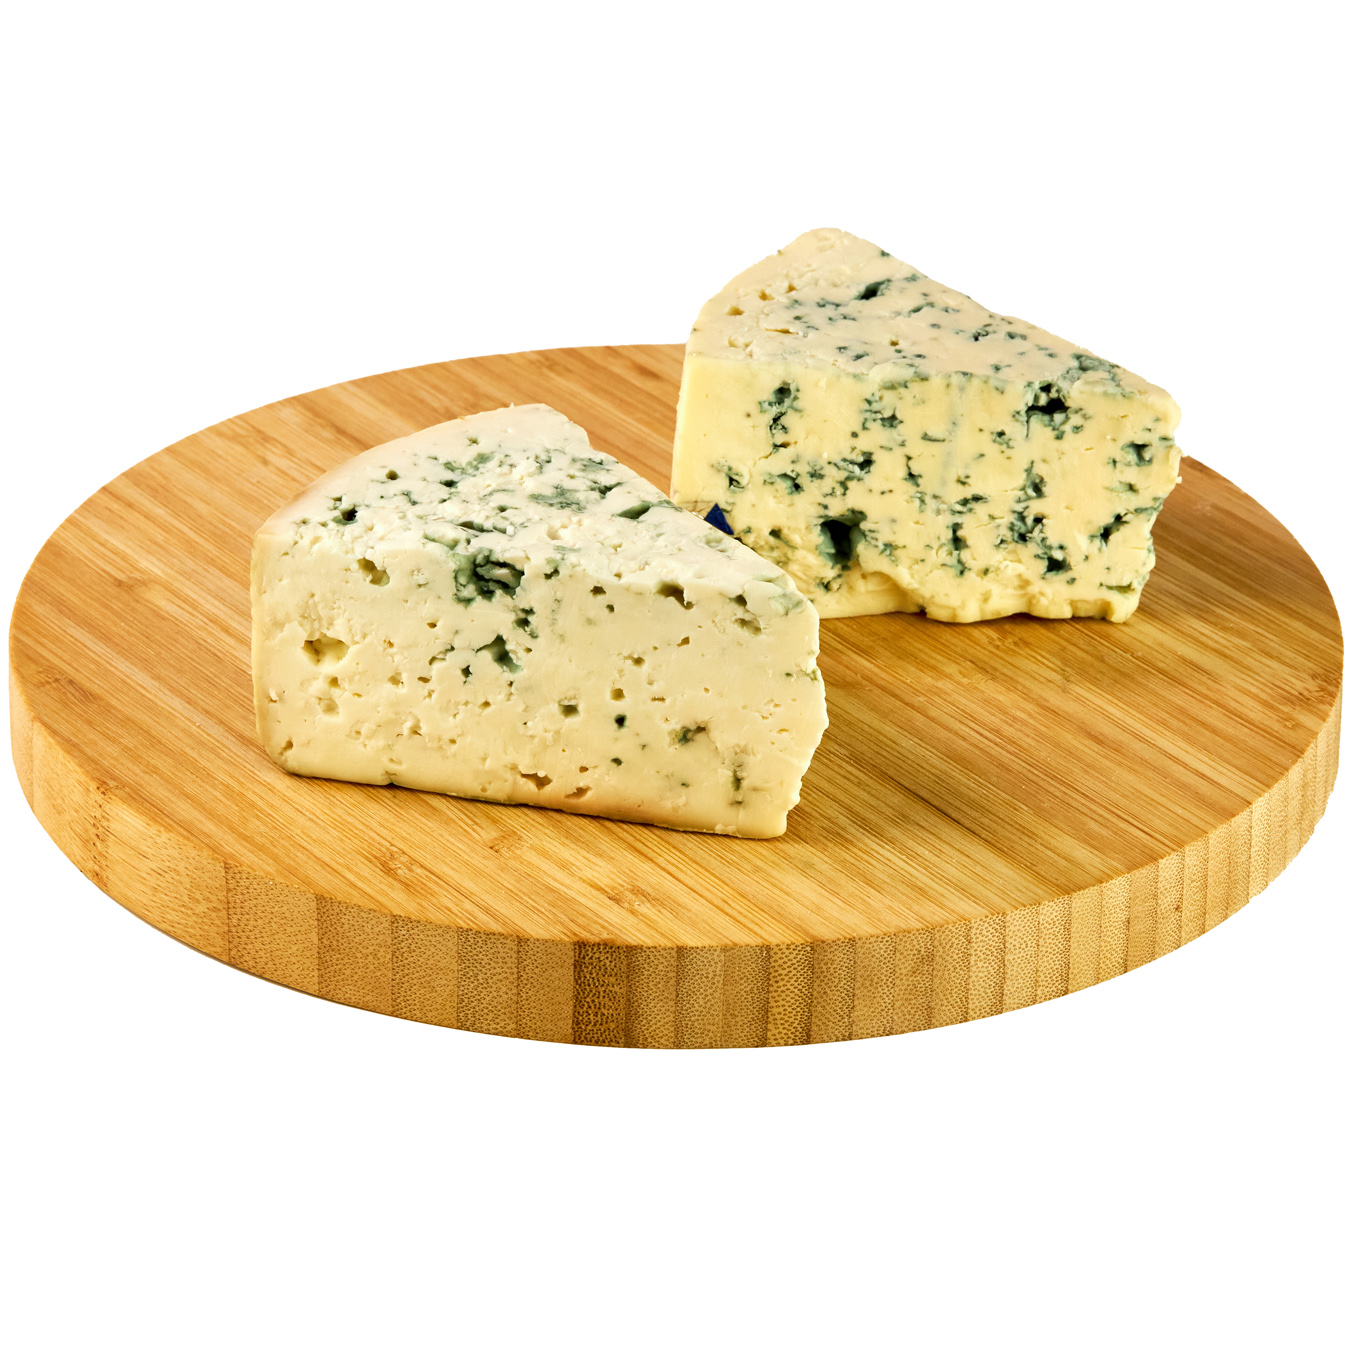 Cheese Lazur Blue with mold 50%